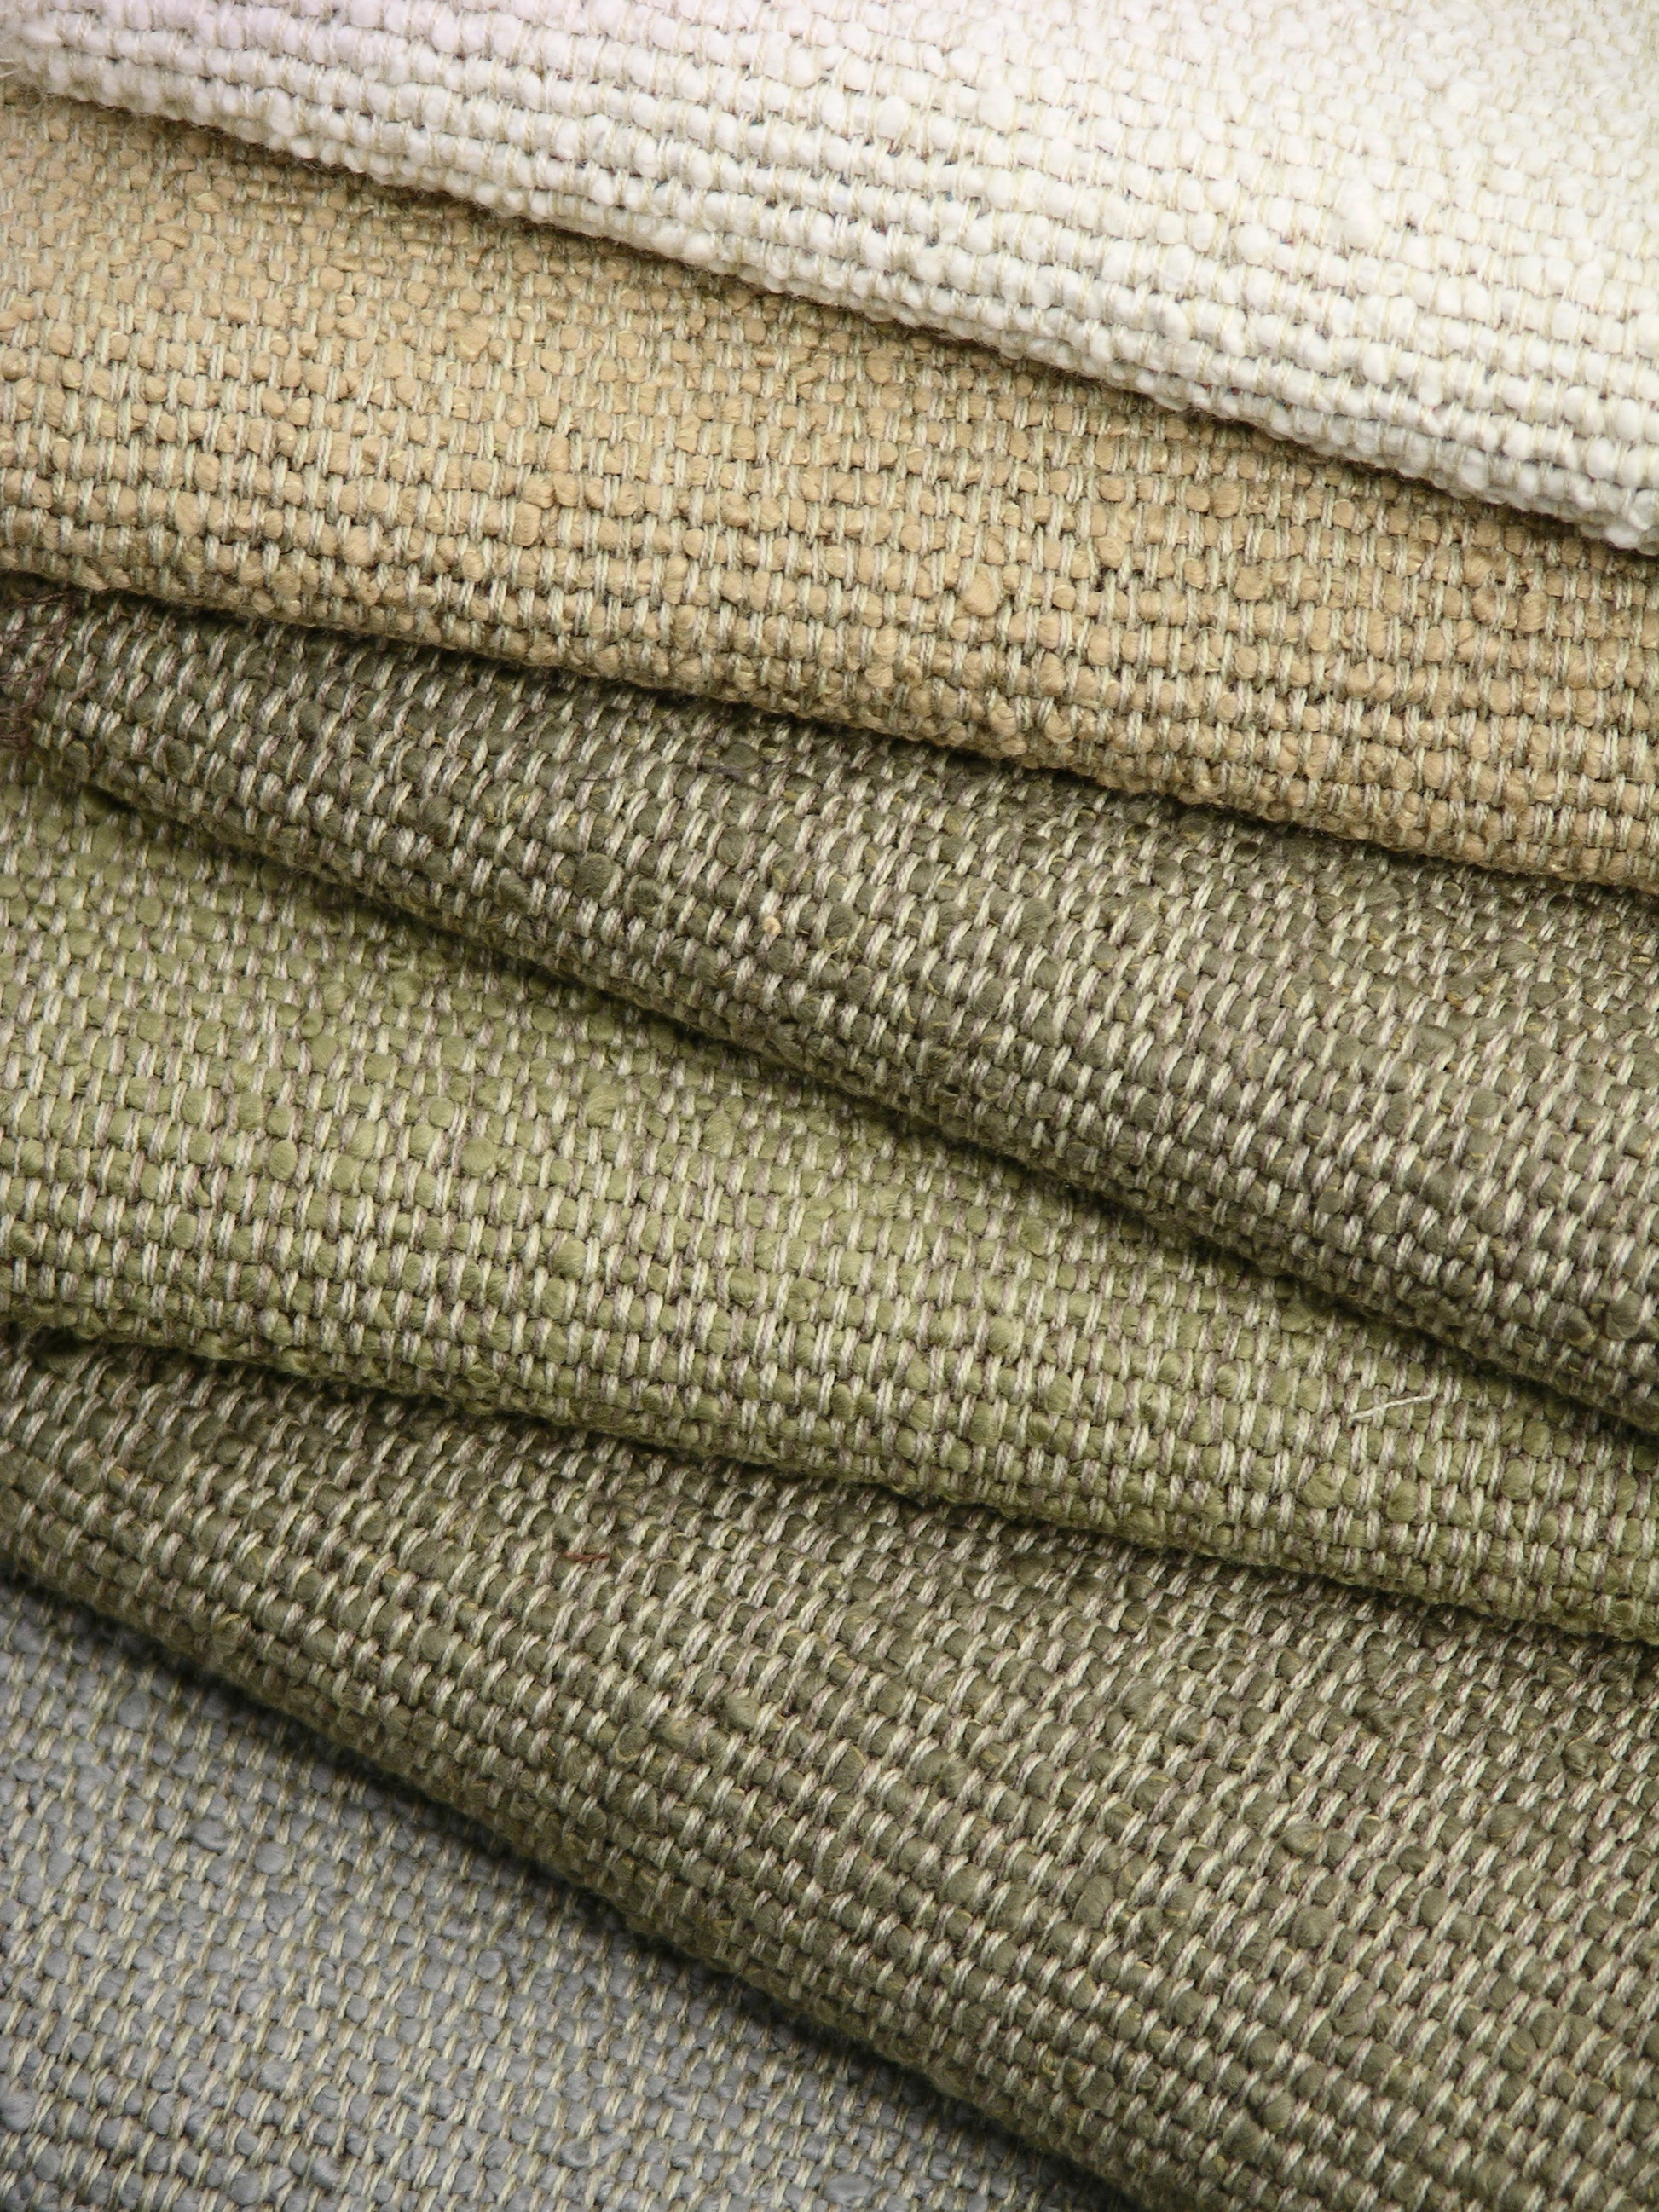 Sustain Performance Brantley Woven Sisal | Home Decor Fabric | 56.75 Wide